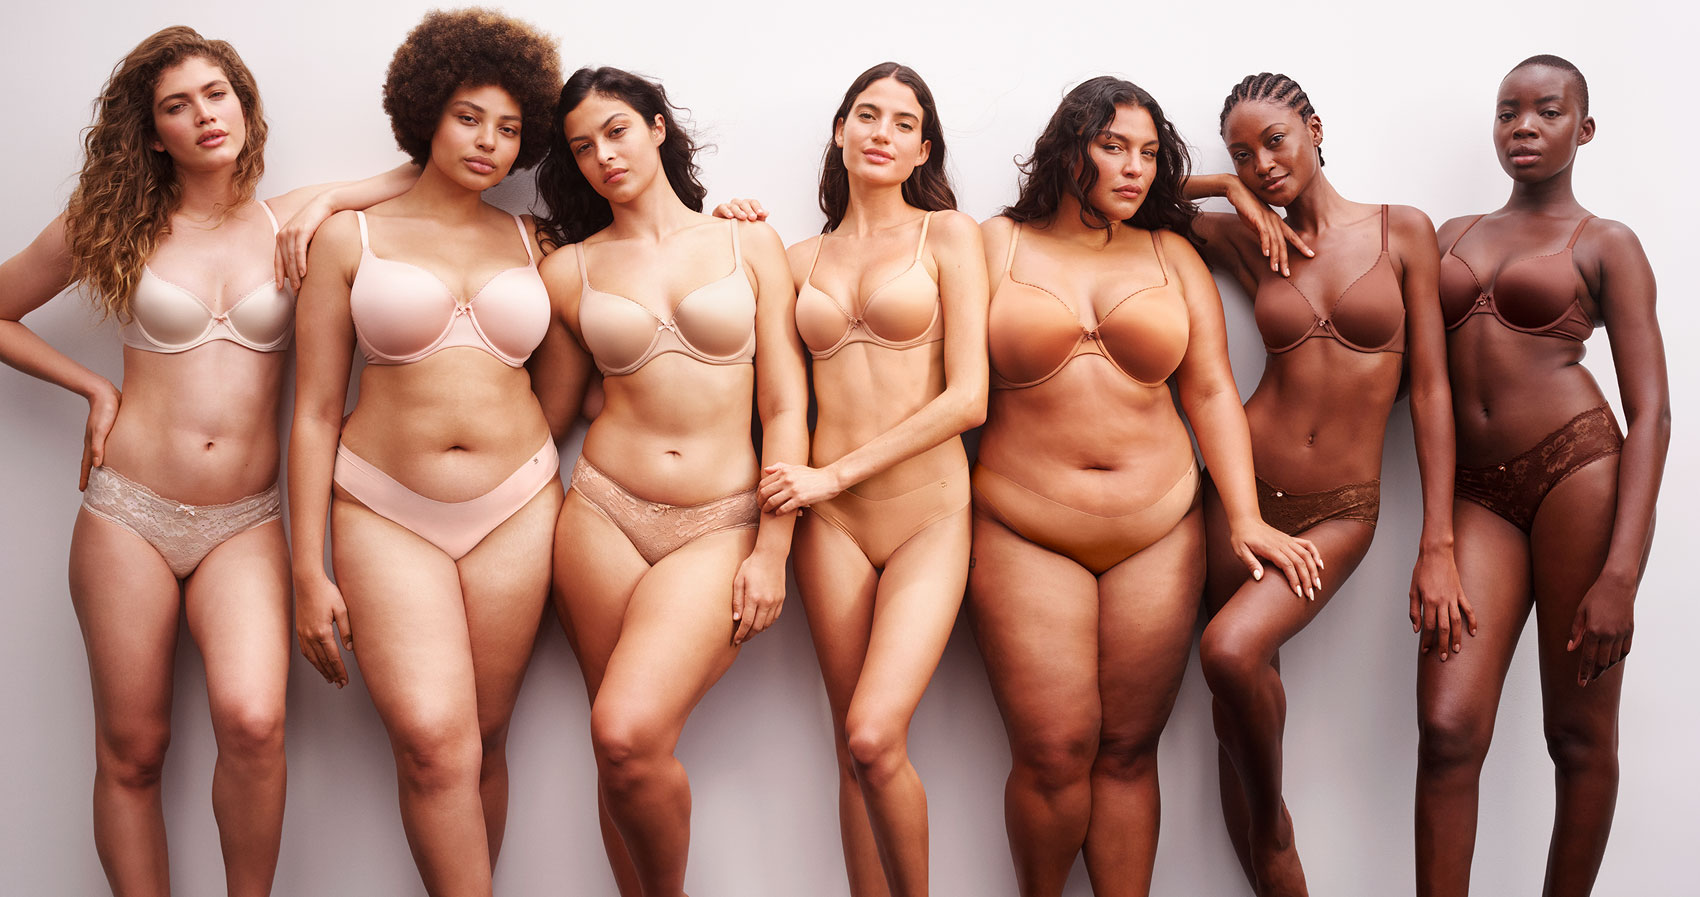 Seven VS female models of diverse body types and skin tones stand in a line, wearing matching nude-colored bras and underwear, posing against a plain white background.